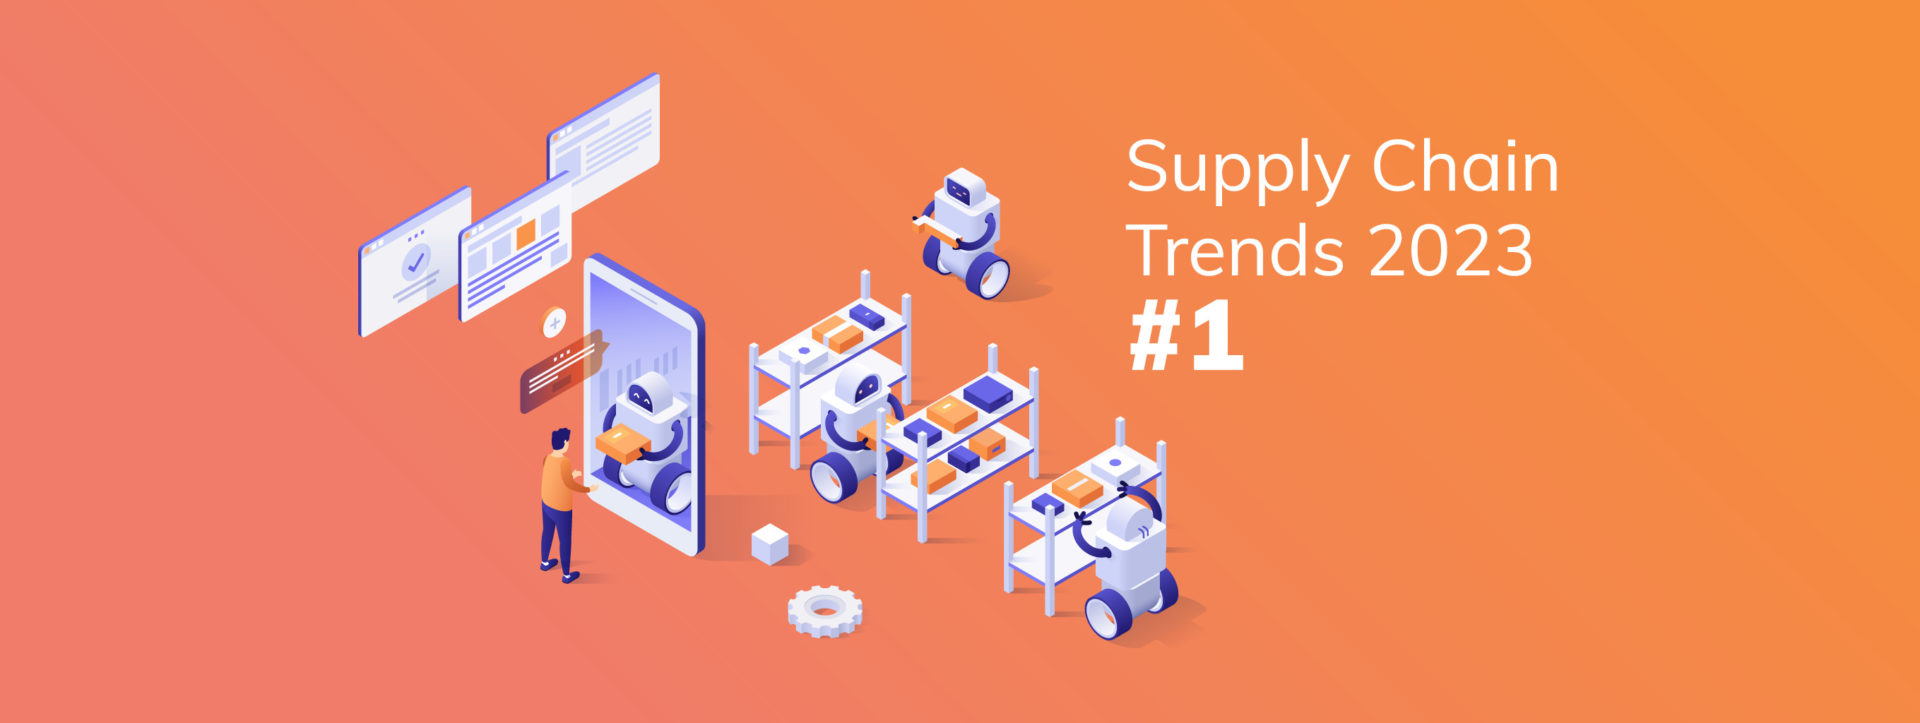 supply chain trends 2023 supply chain trends 2023 automation risk